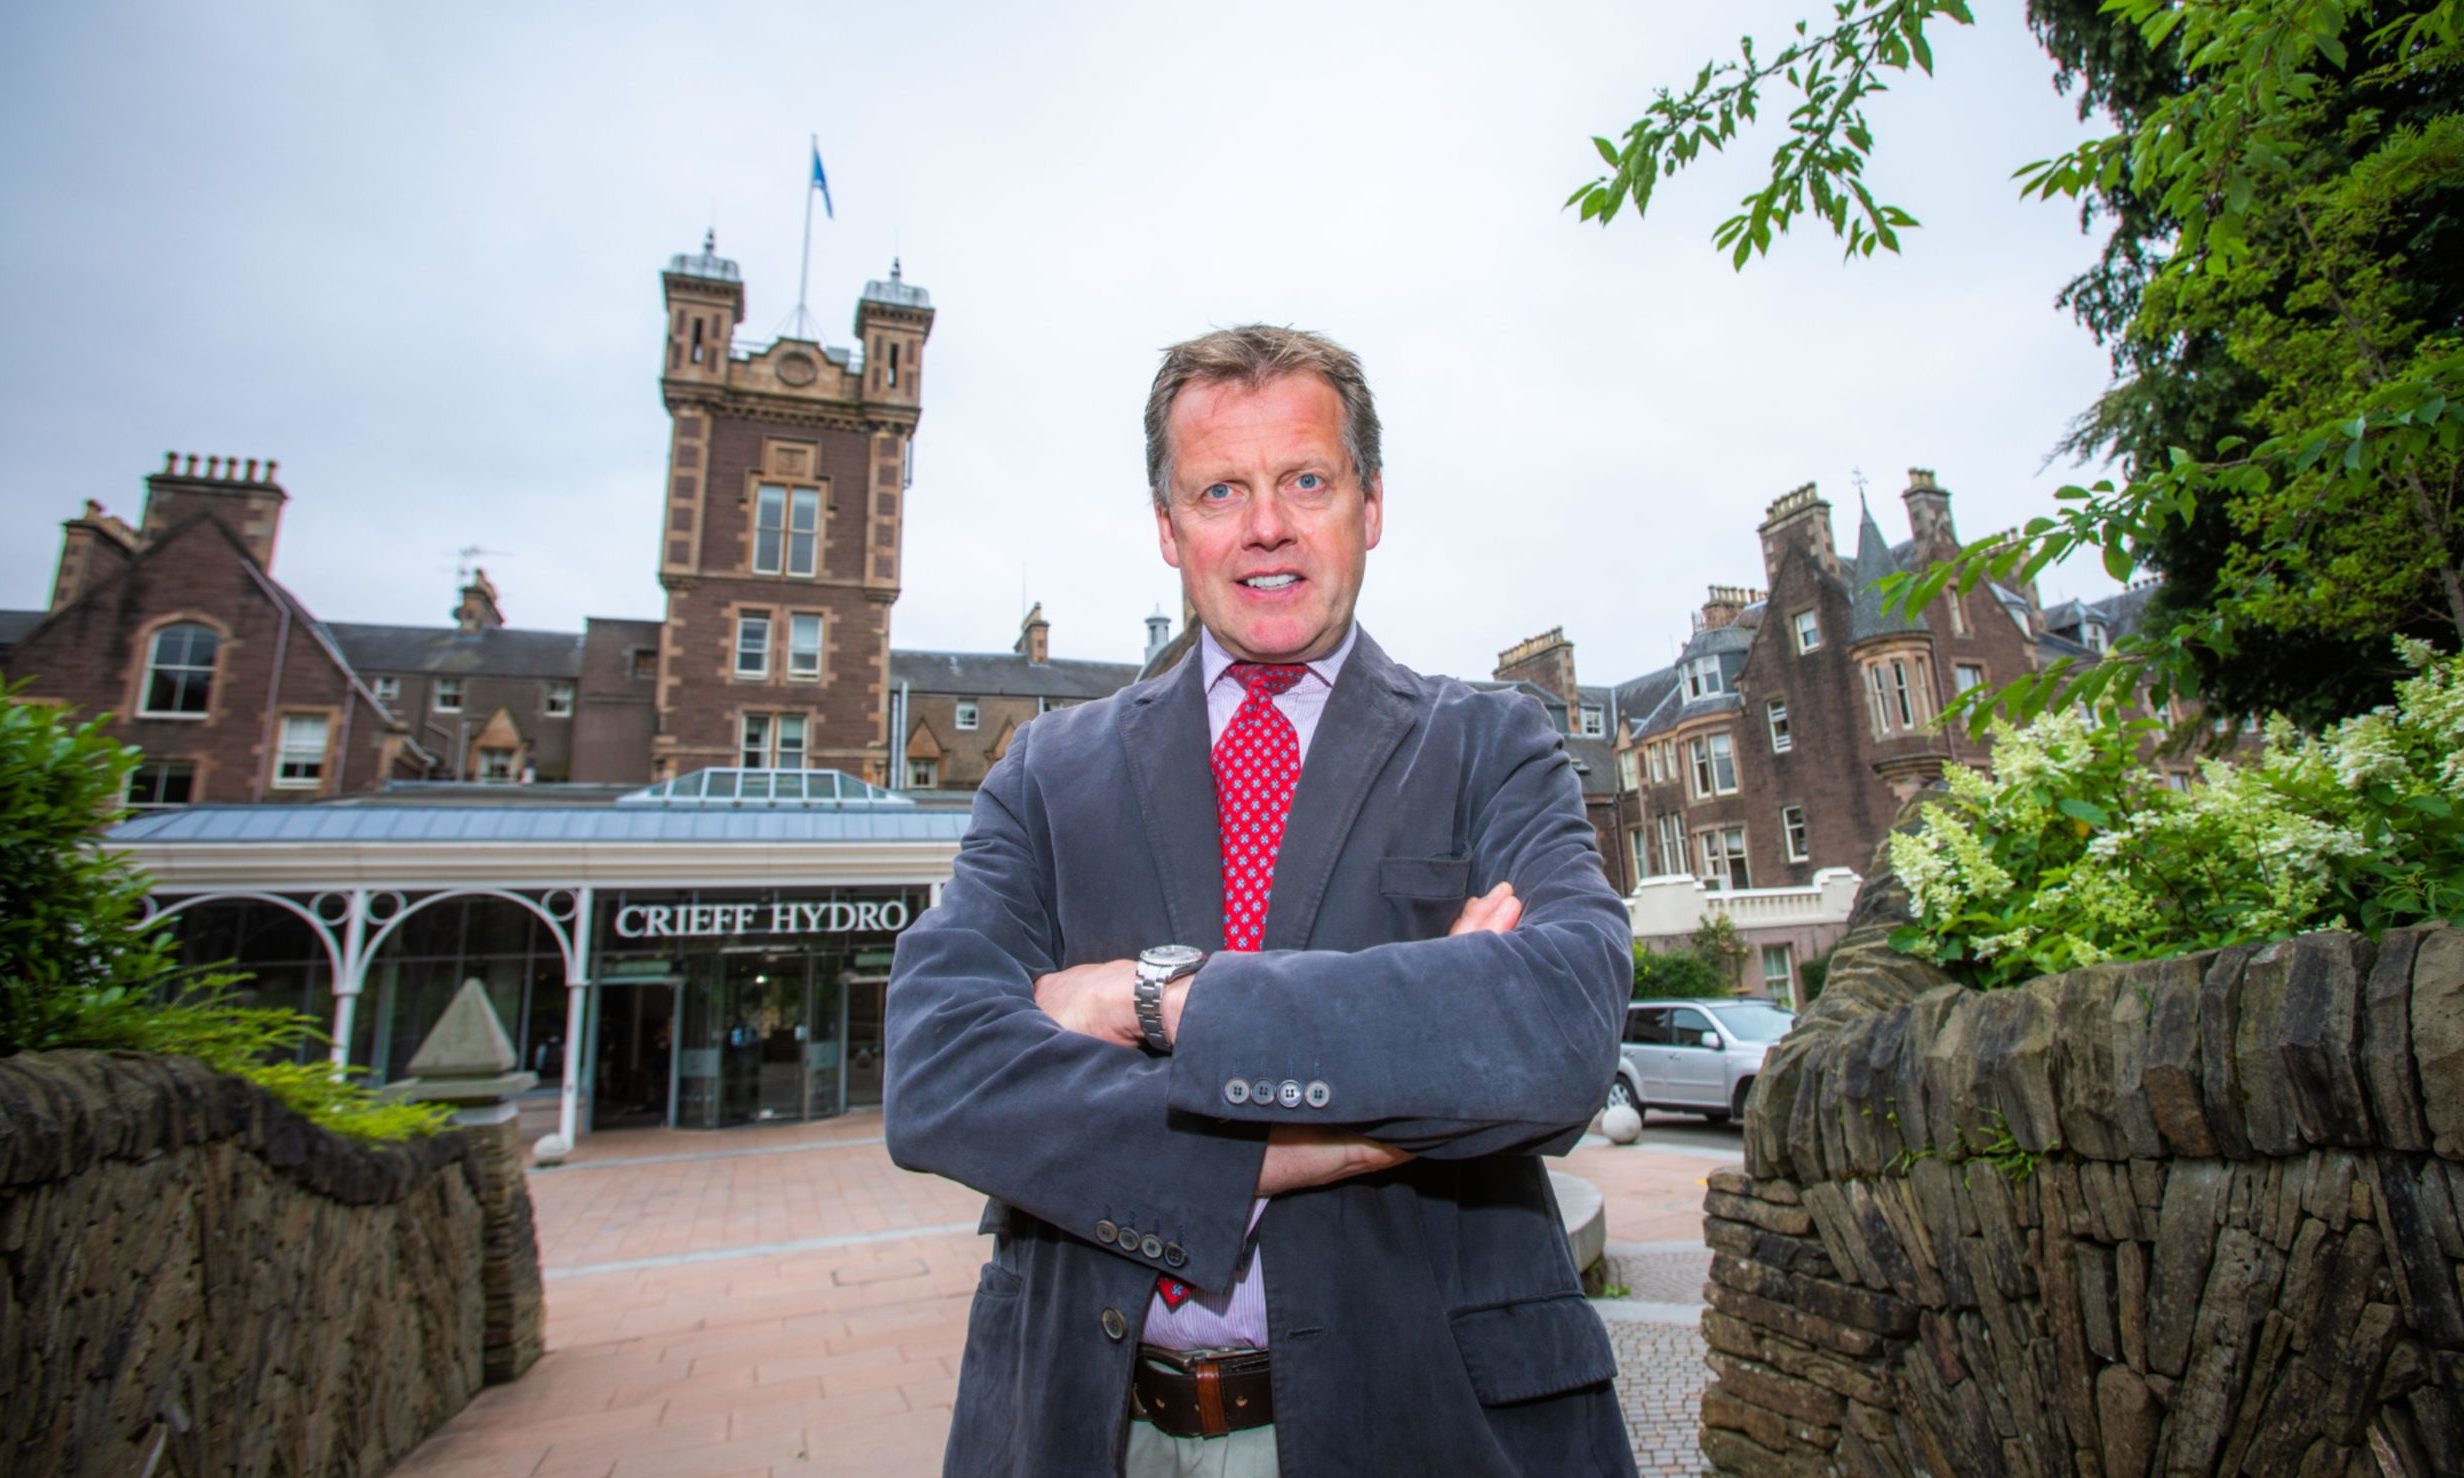 Stephen Leckie outside Crieff Hydro in February 2020